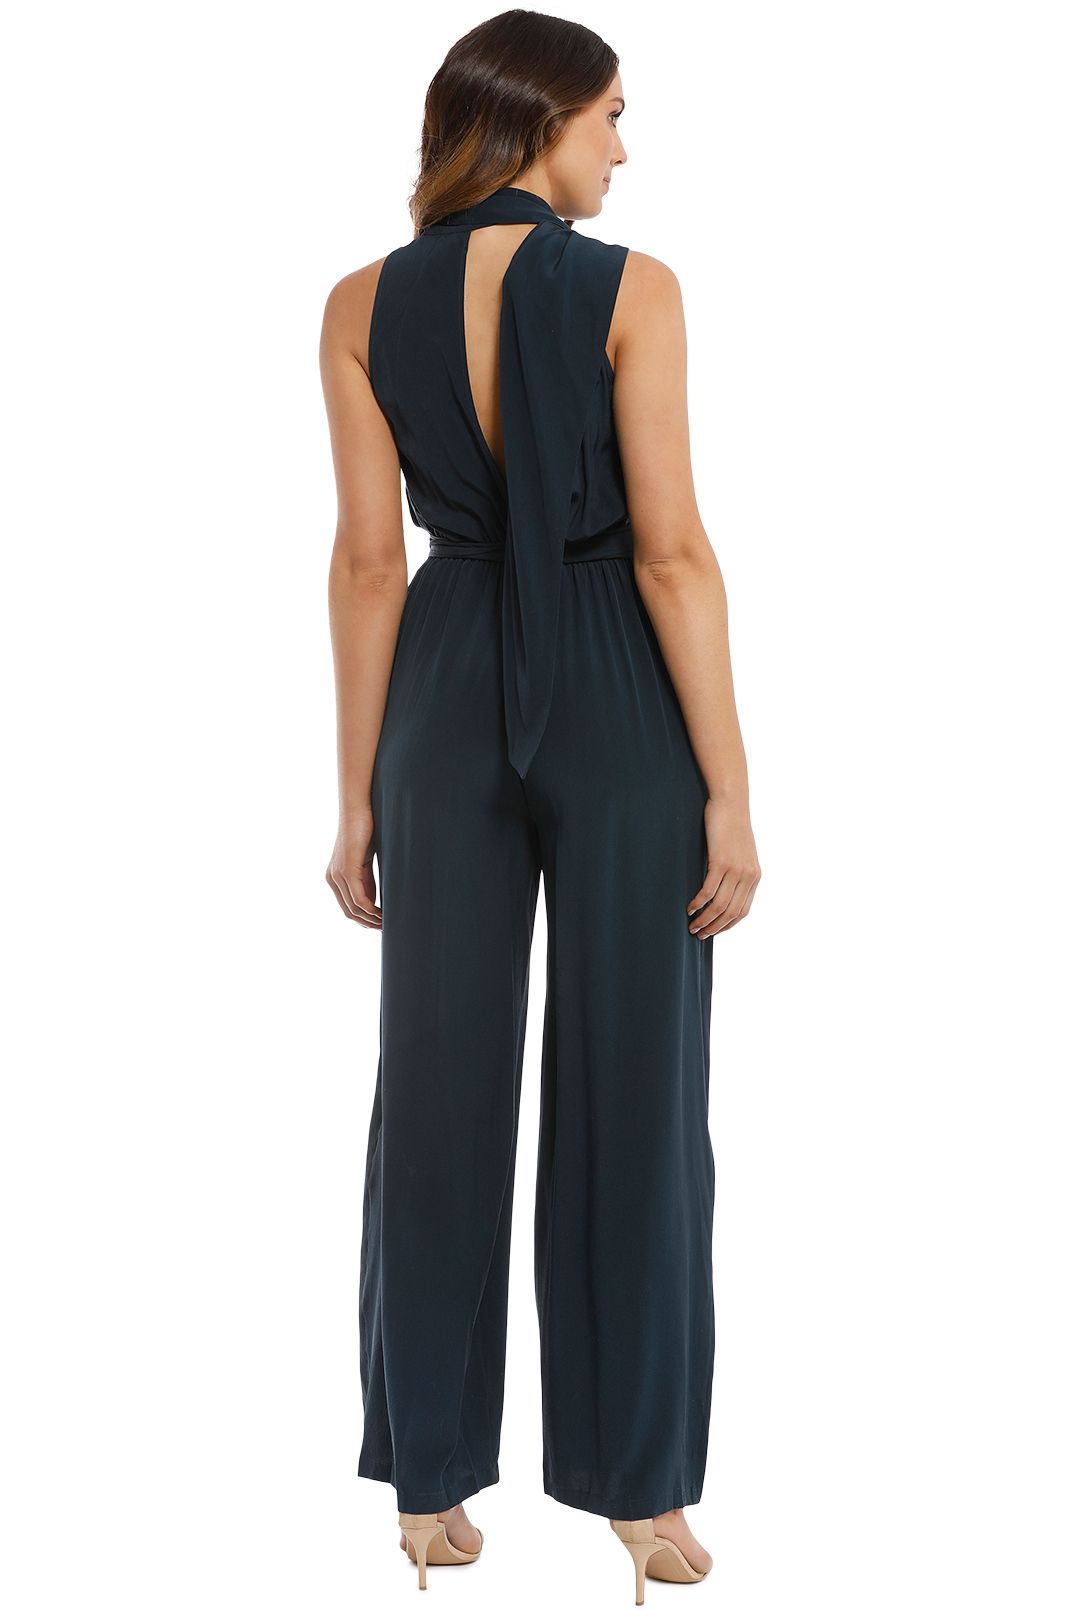 Sass and Bide - The Icon Jumpsuit - Petrol - Back